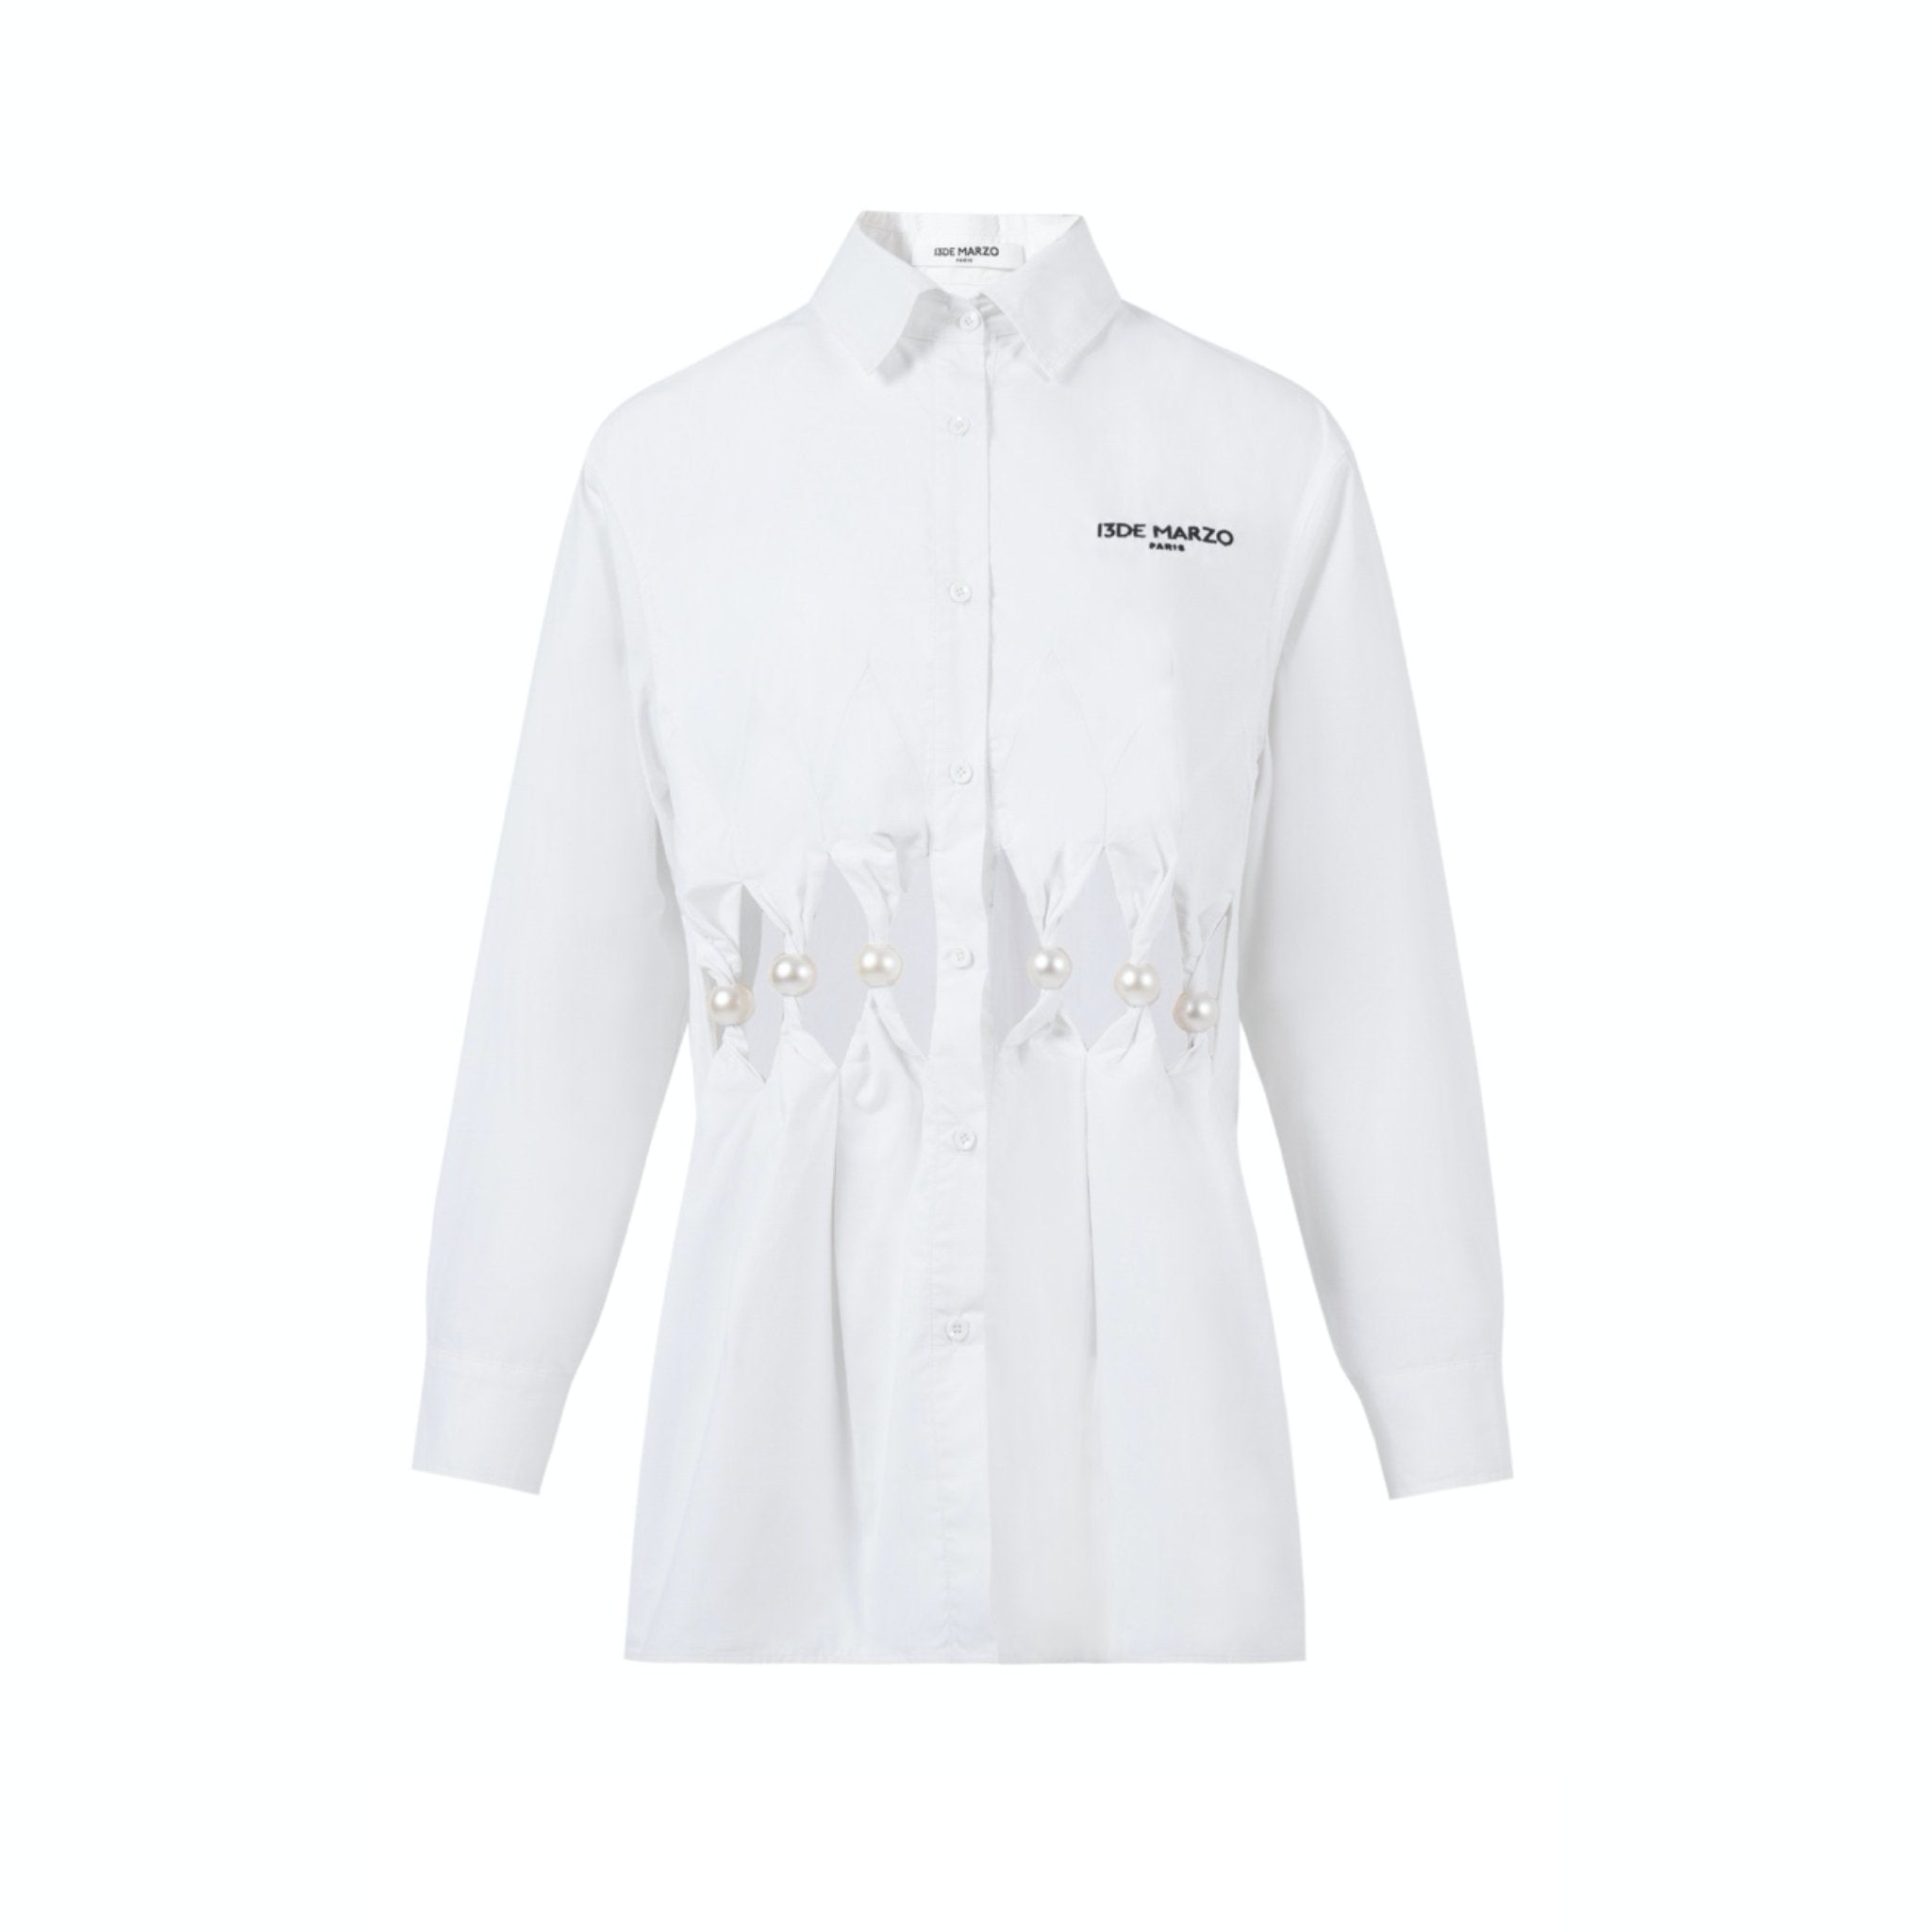 13 DE MARZO Pearl Hollow Out Shirt White | MADA IN CHINA